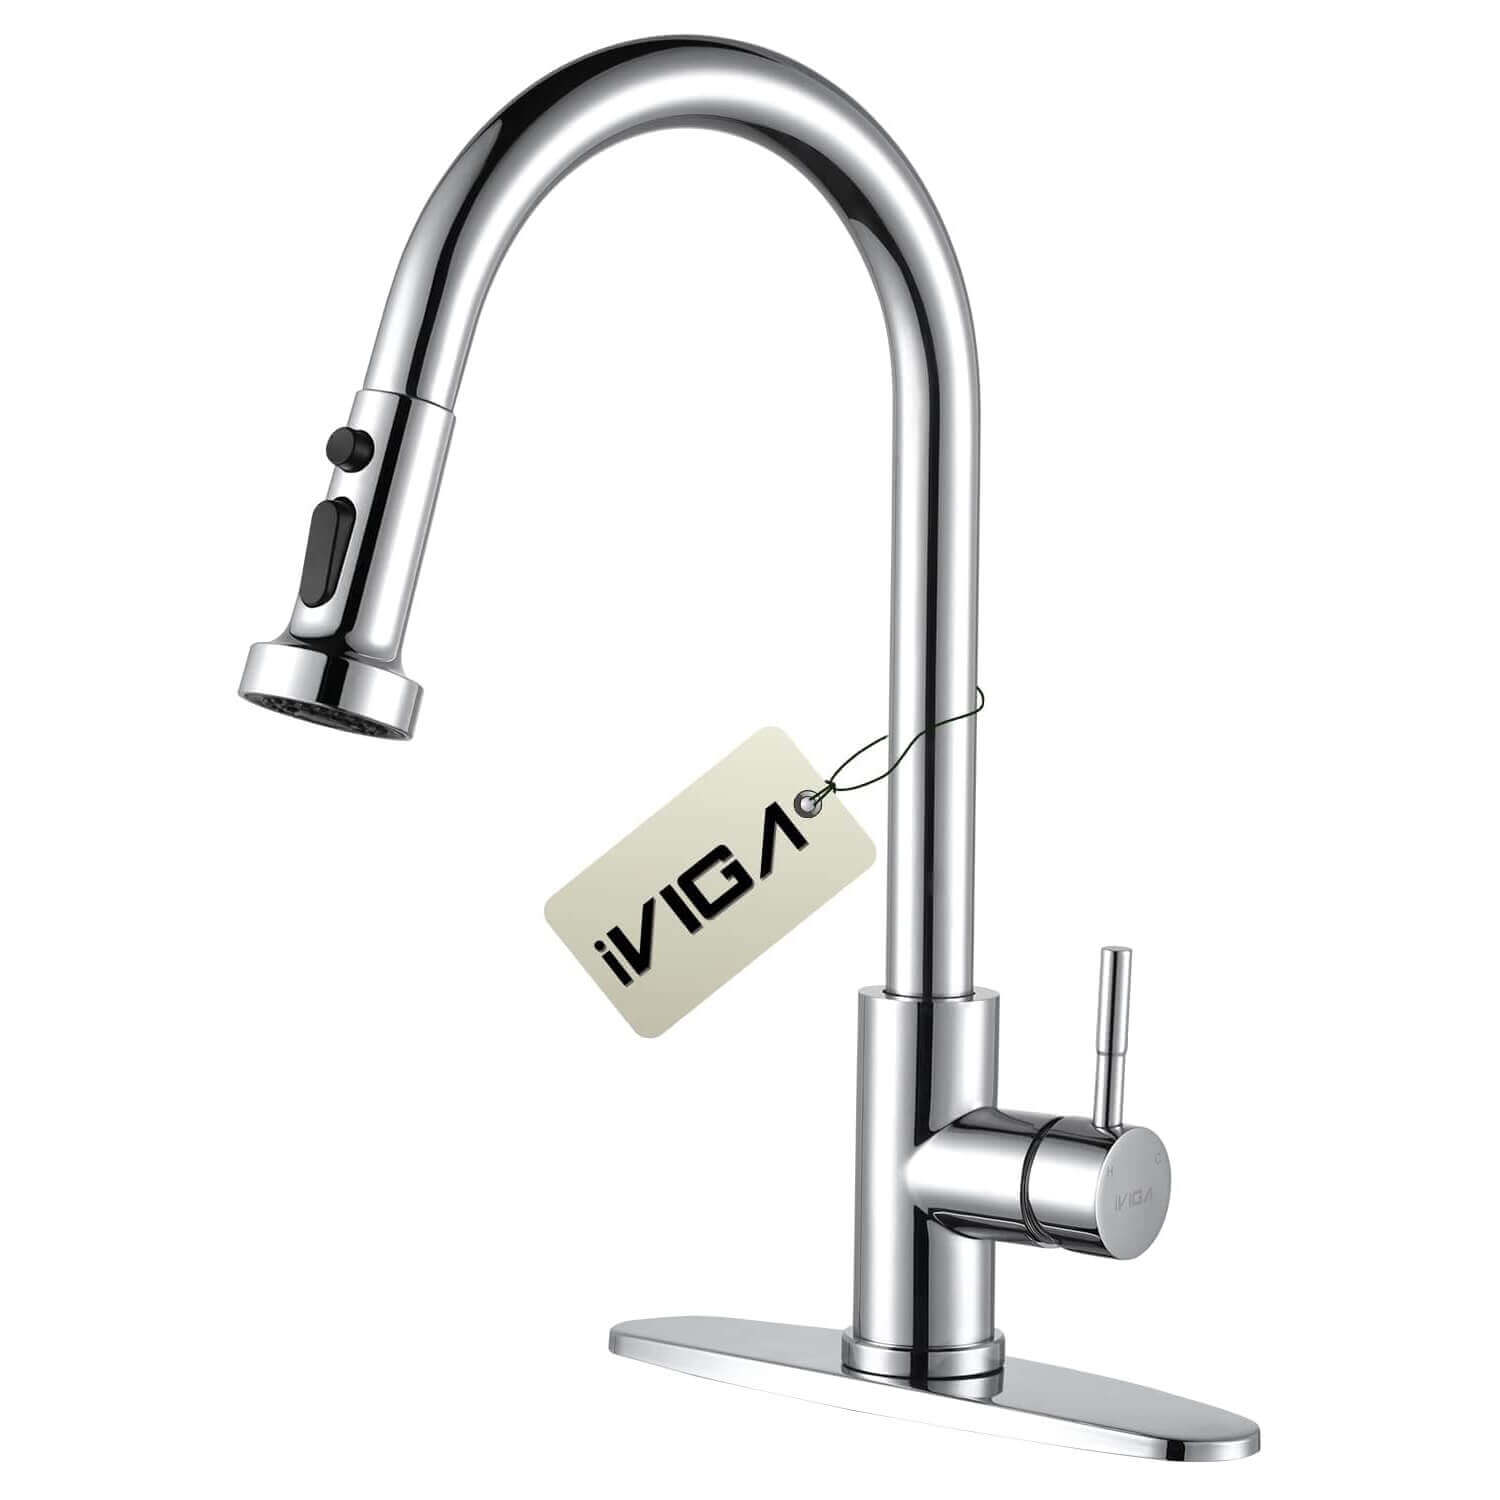 iVIGA High Arc Single Handle Chrome Kitchen Faucet with Pull Down Sprayer